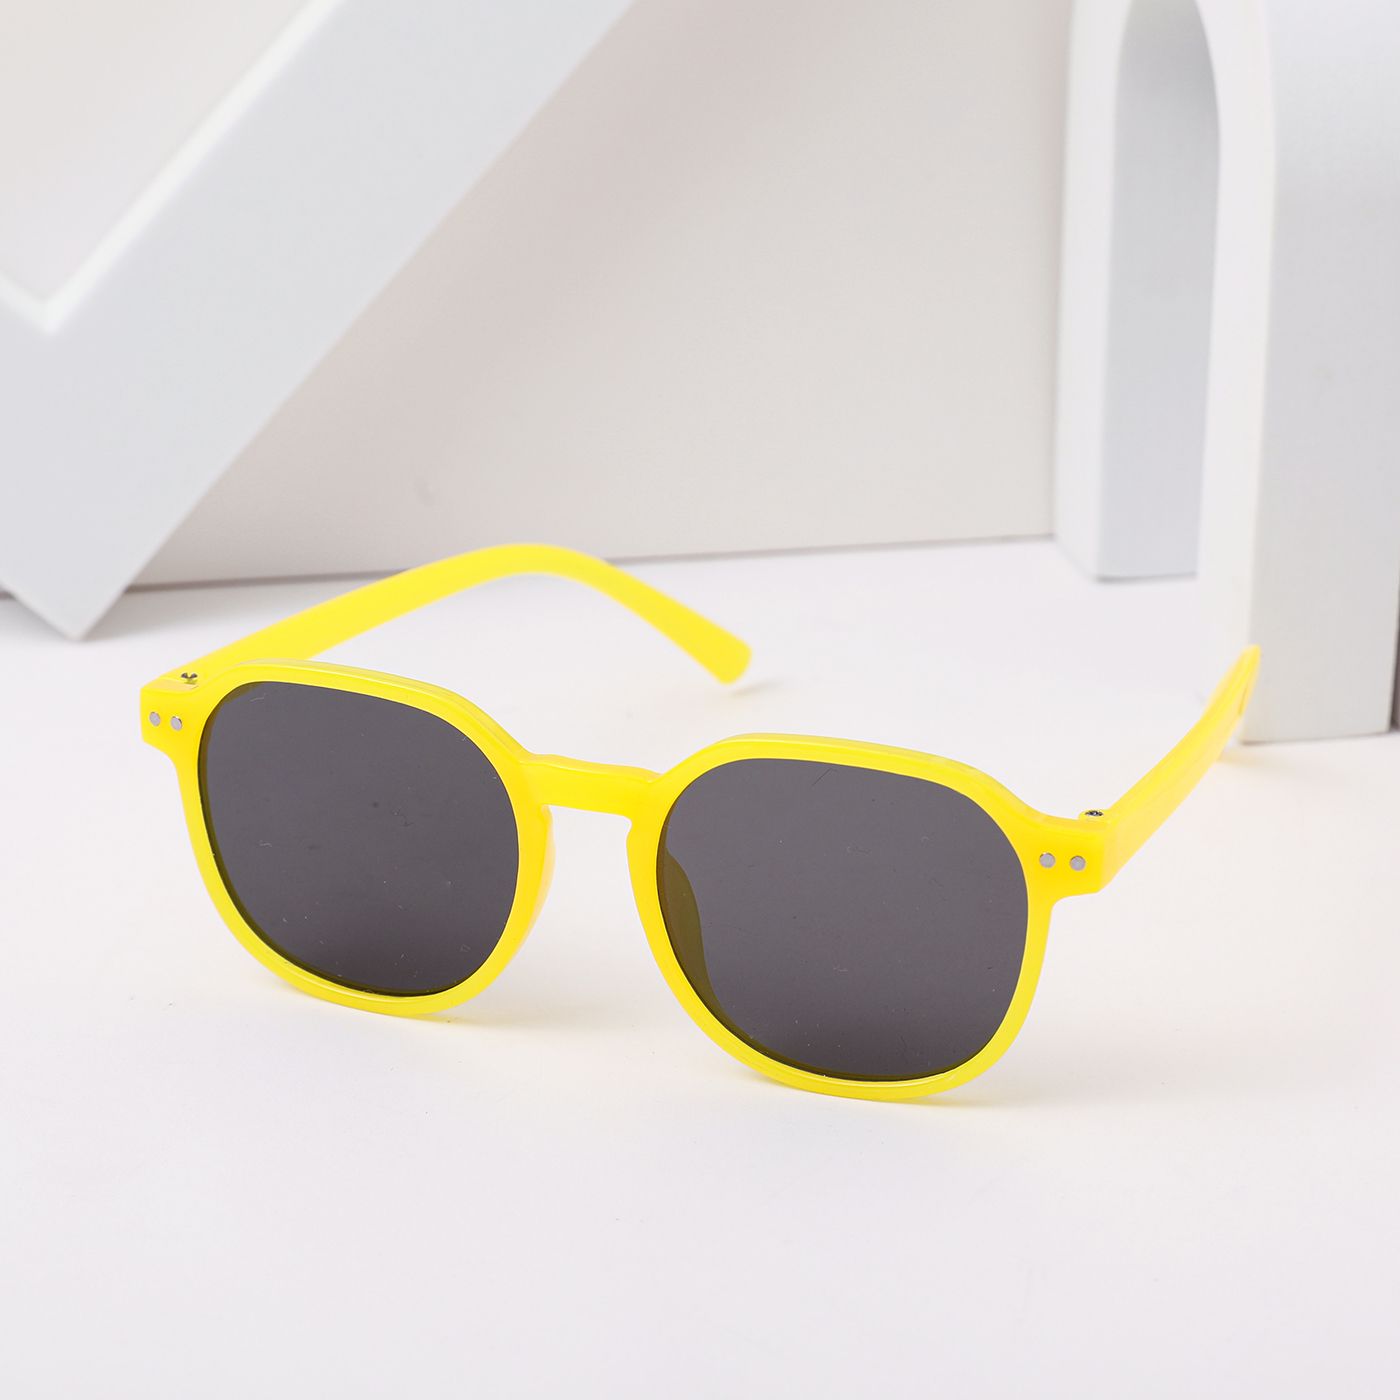 Toddler/Kid Fashion Cute Sunglasses (with Box)